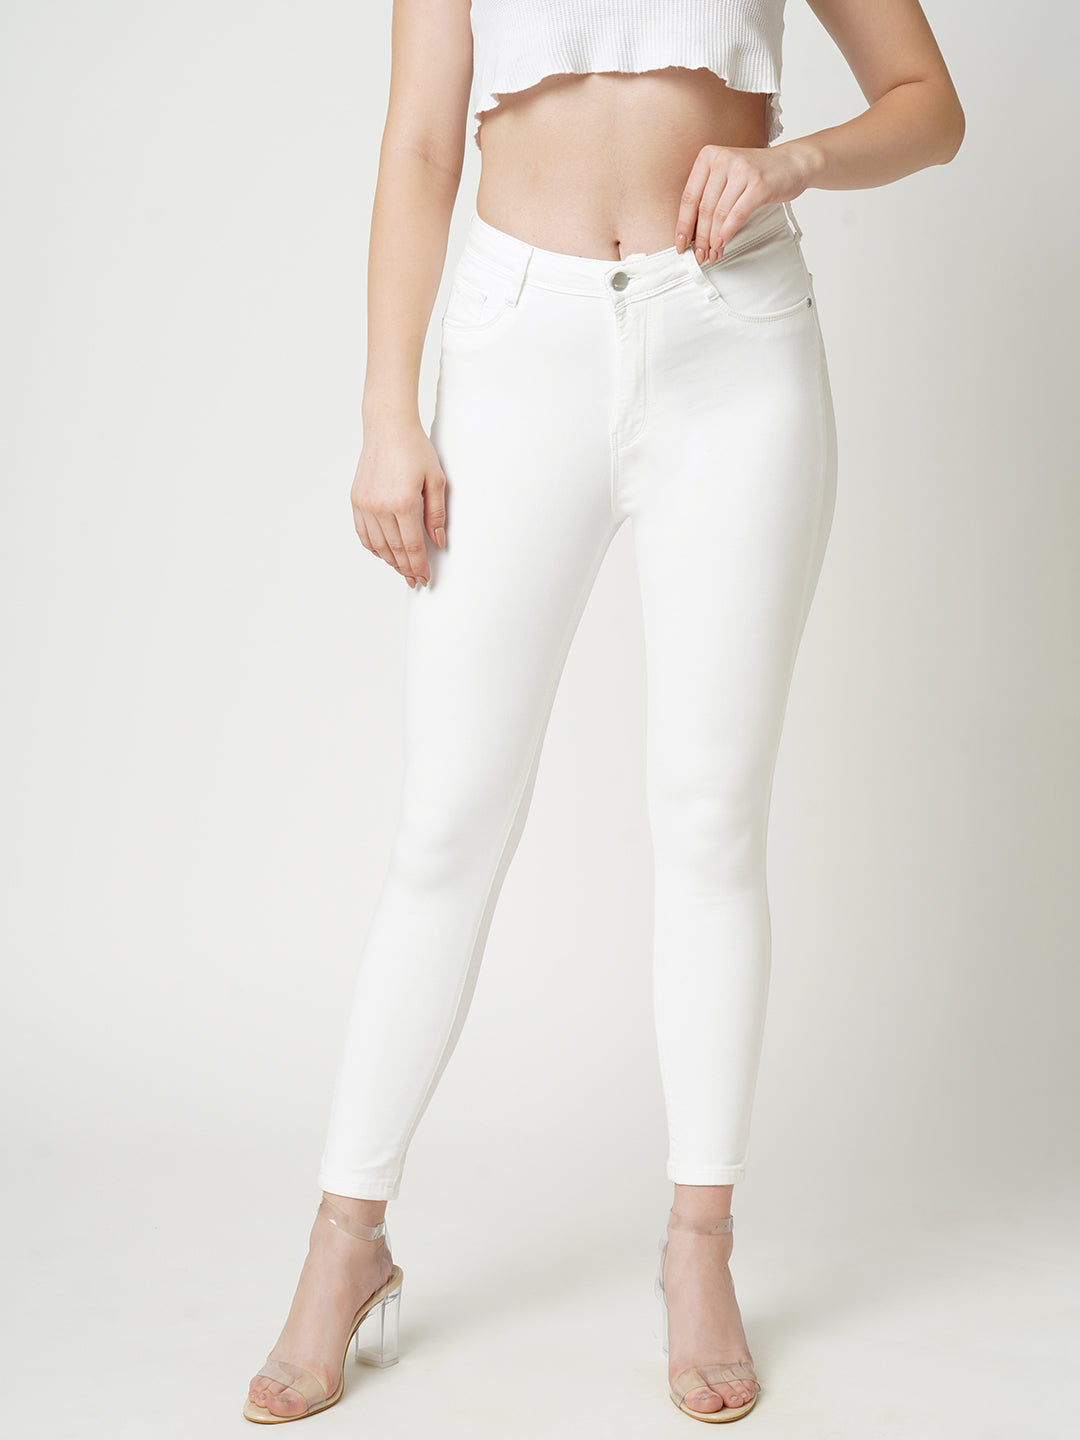 Levice White Jeans - Buy Levice White Jeans online in India